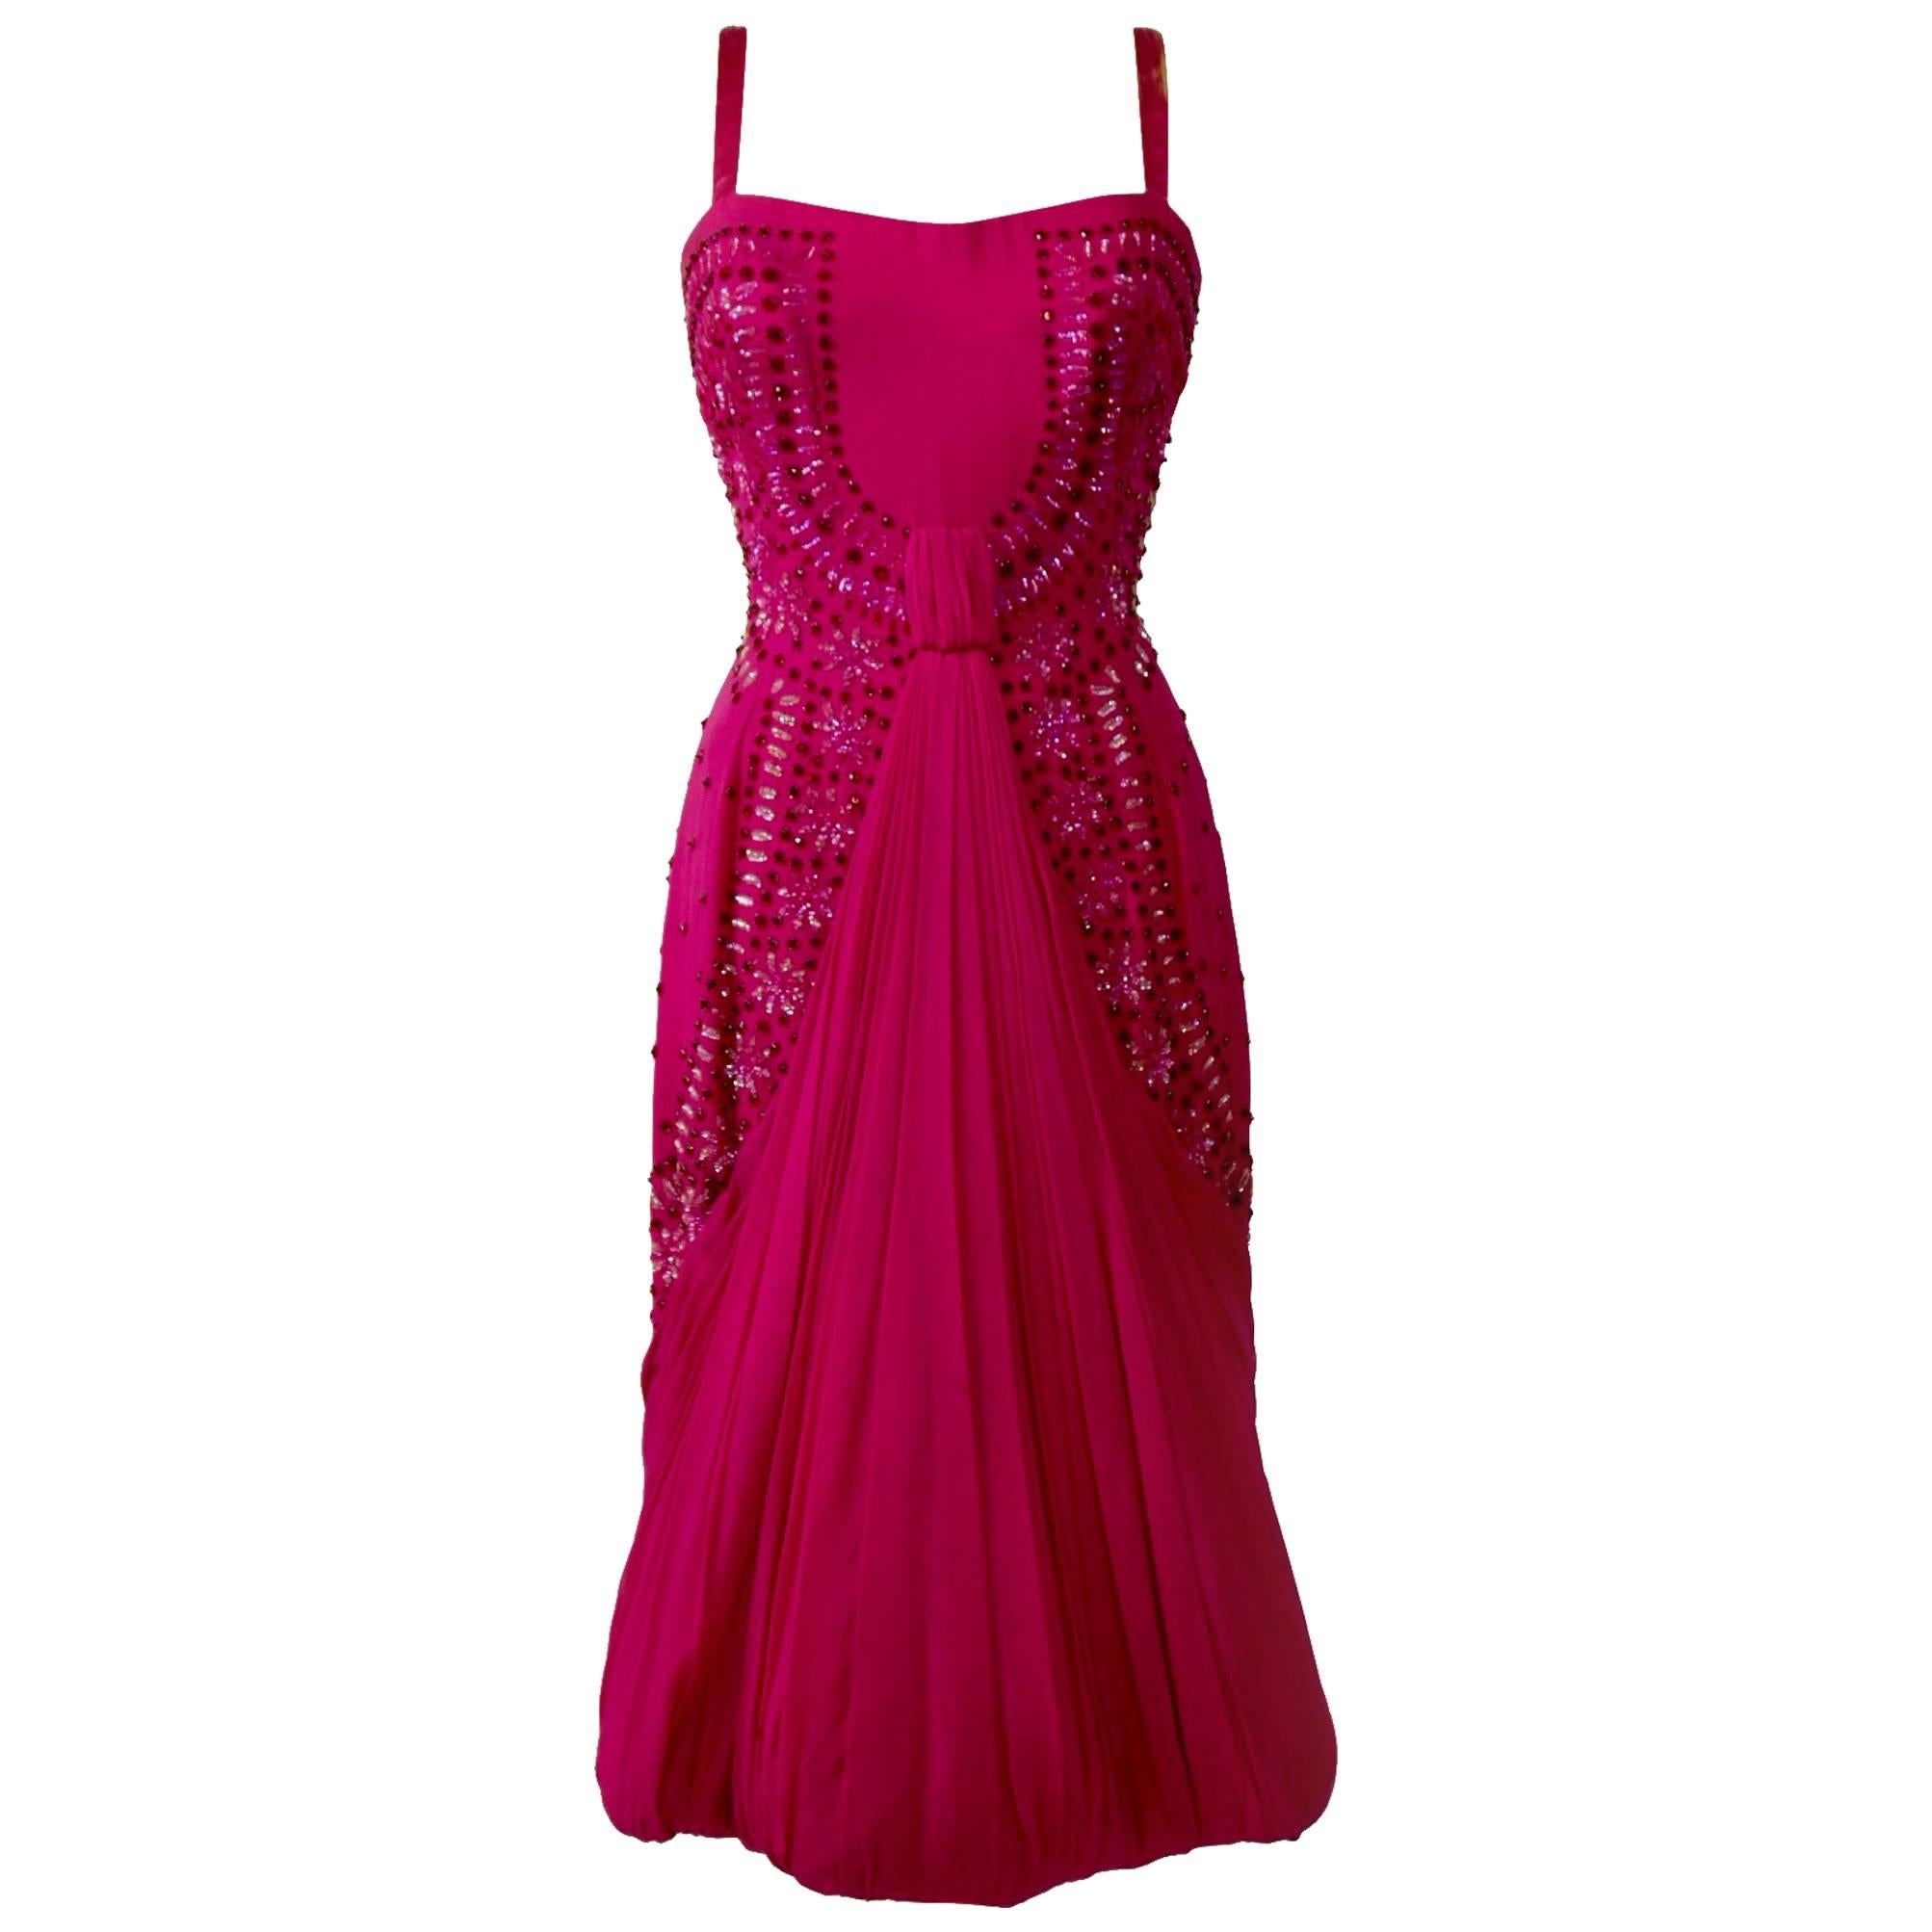 1950s FERCIONI Italian Couture Embroidered Silk Crepe Bombshell Cocktail Dress